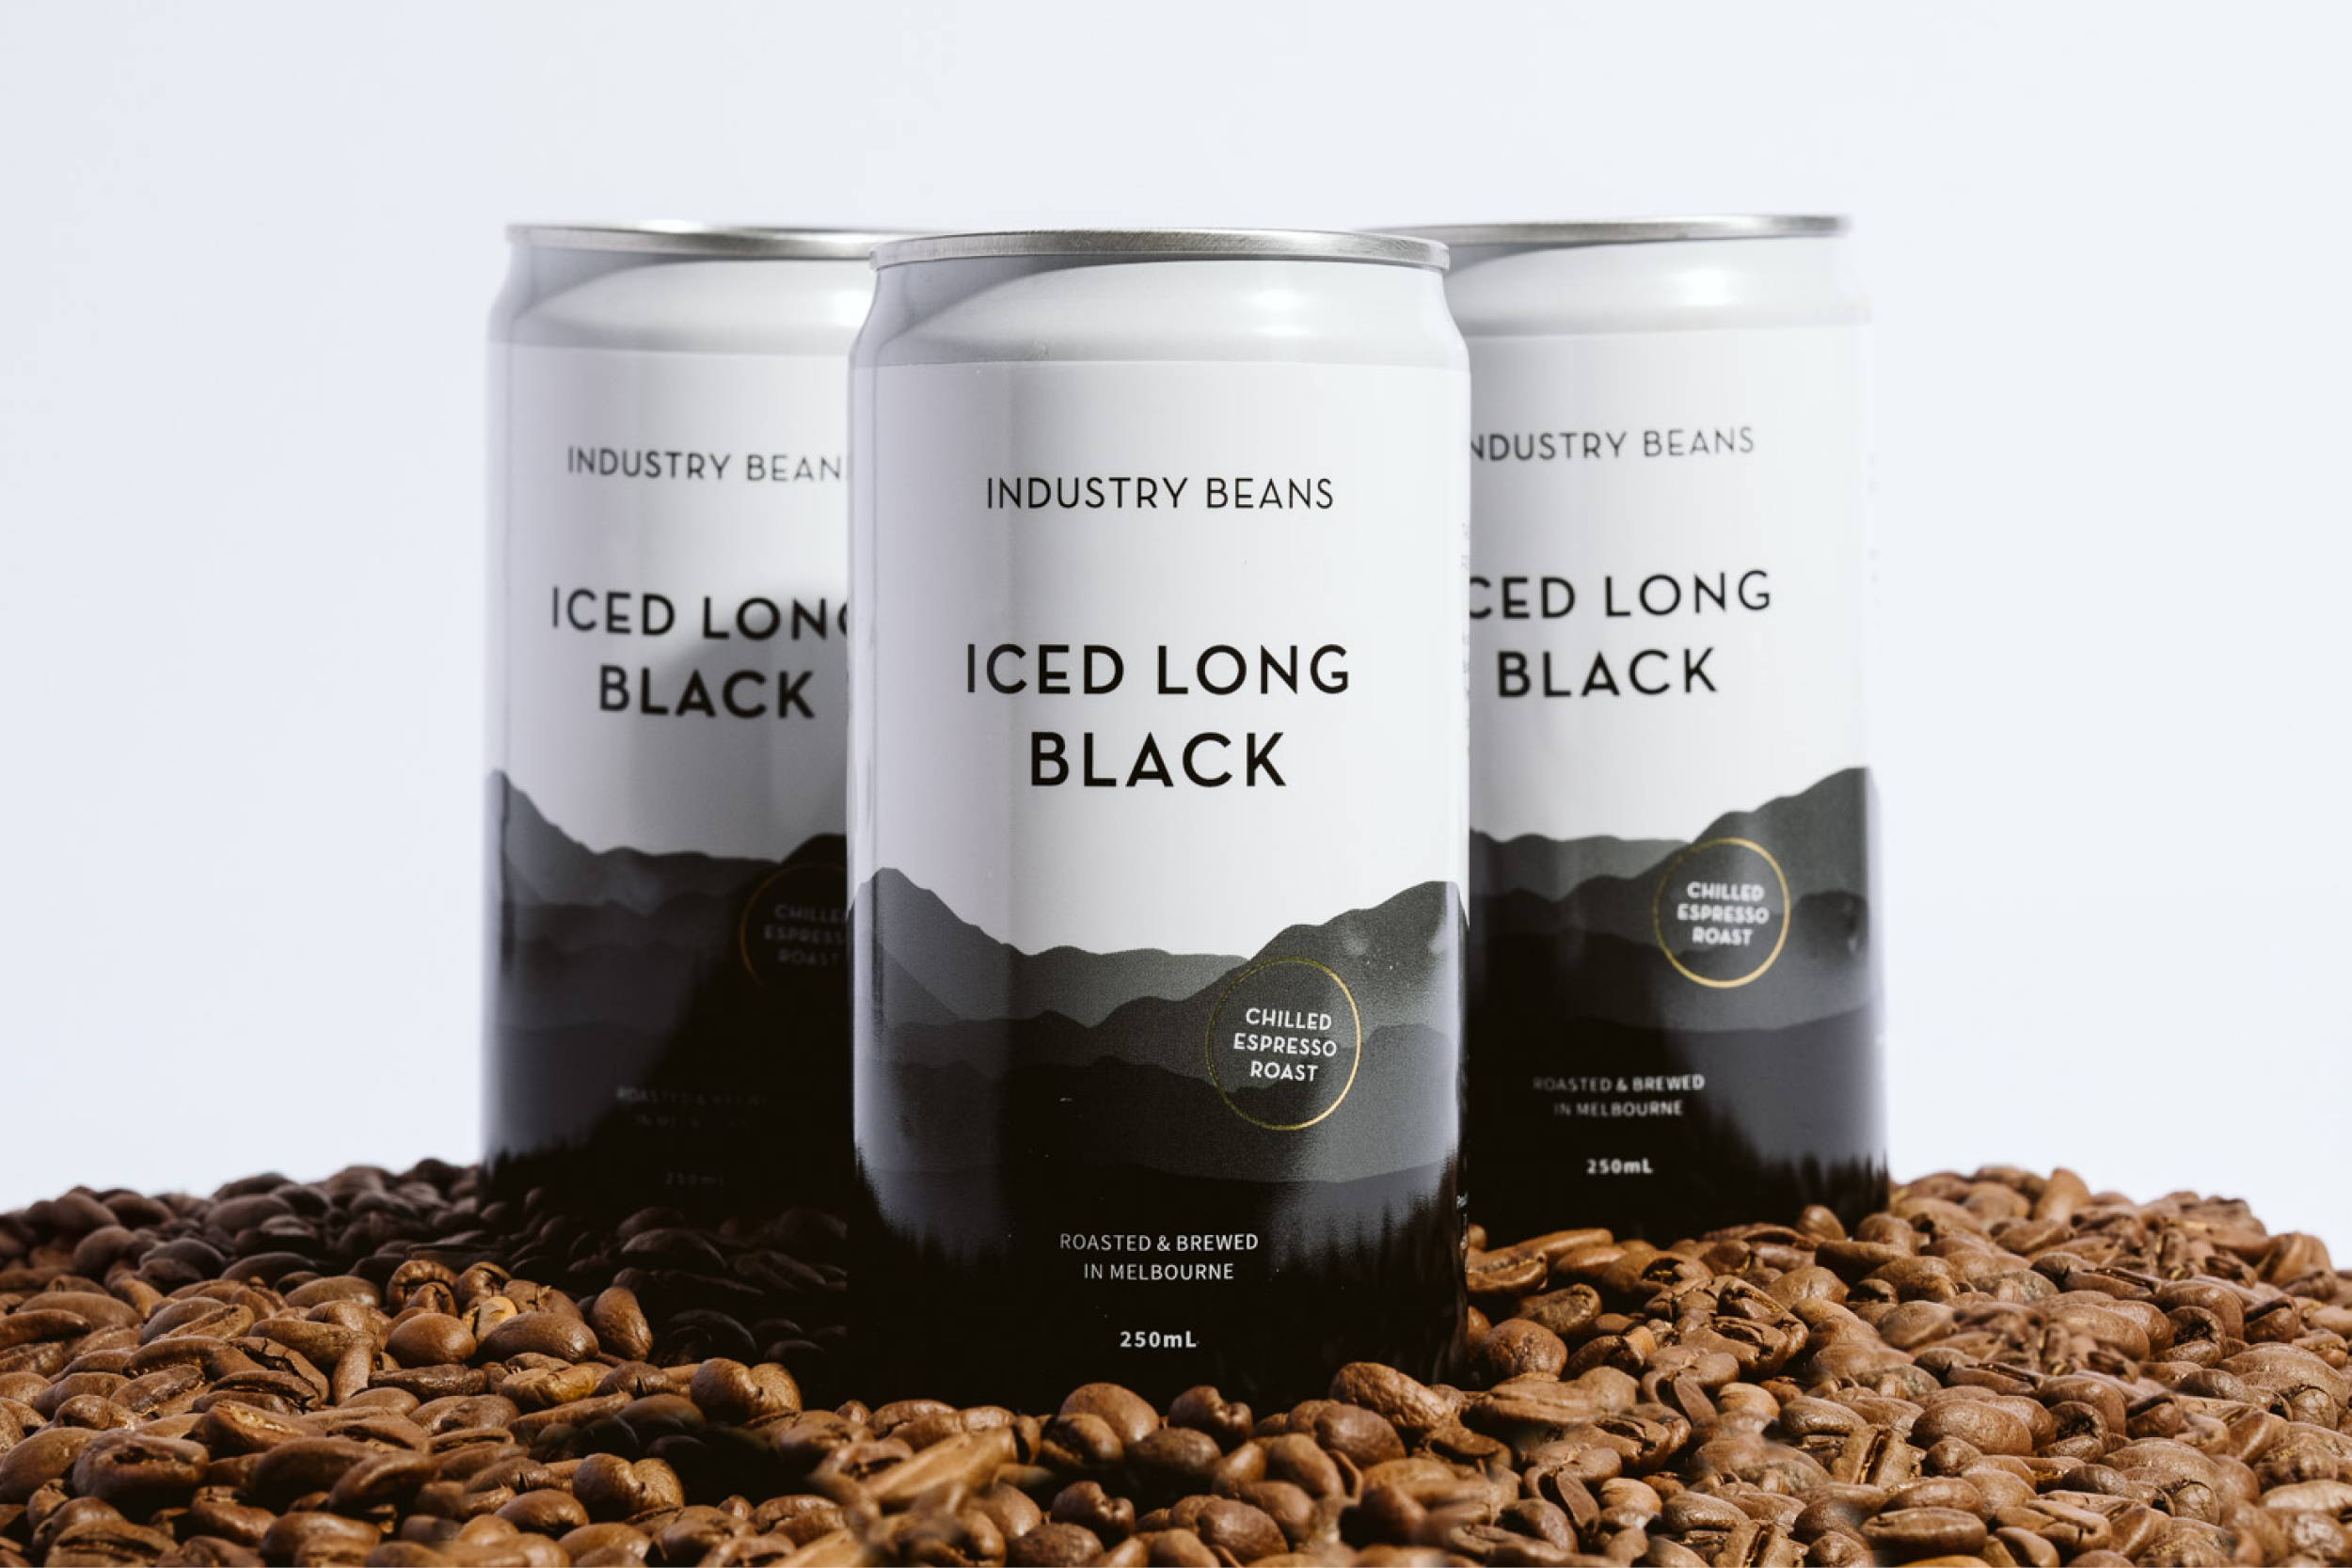 Introducing Our Iced Long Black Cans